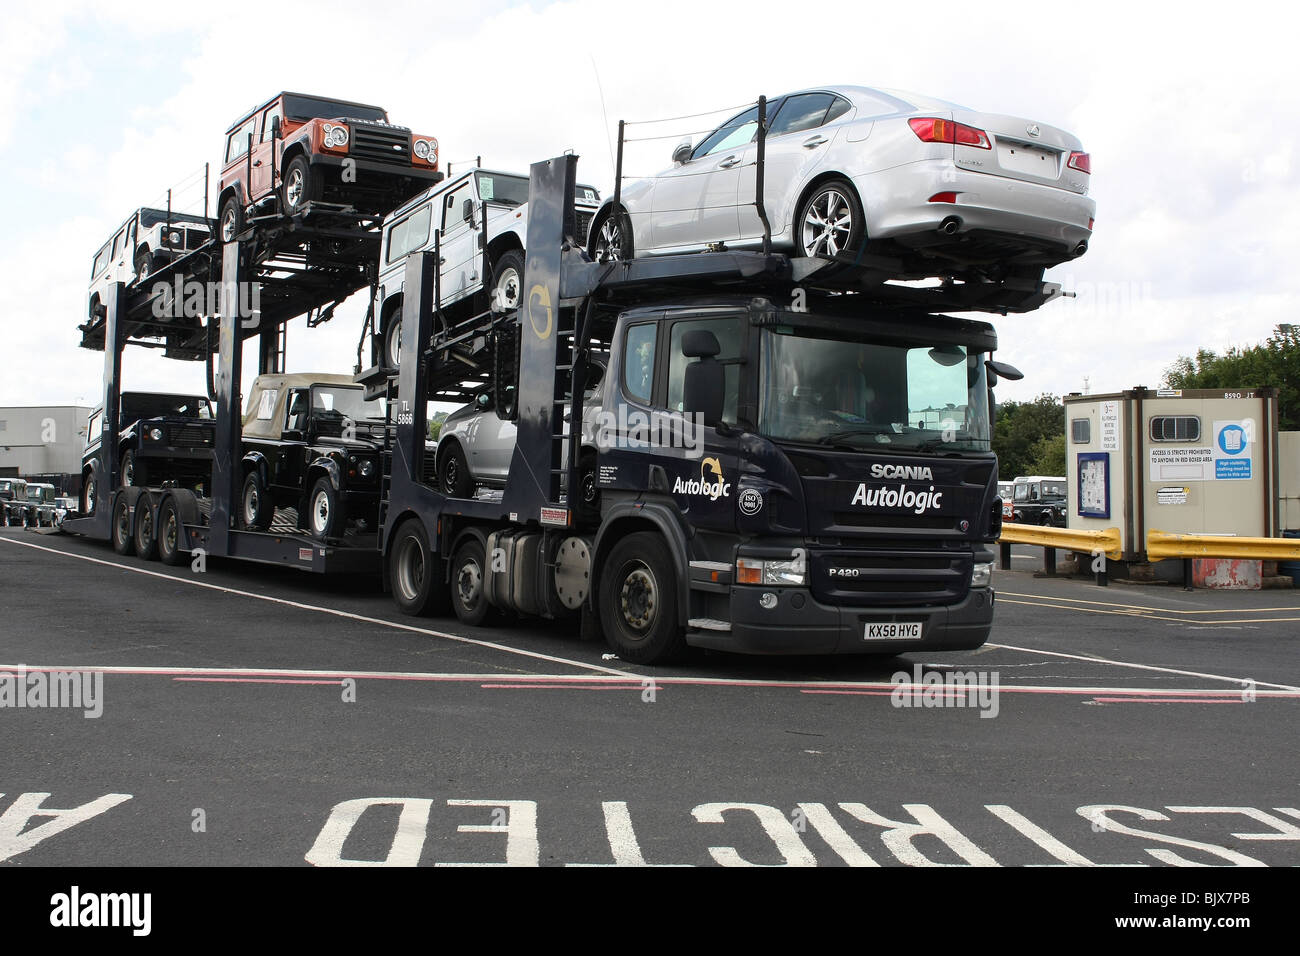 Car transporter being loaded with Land Rovers Stock Photo